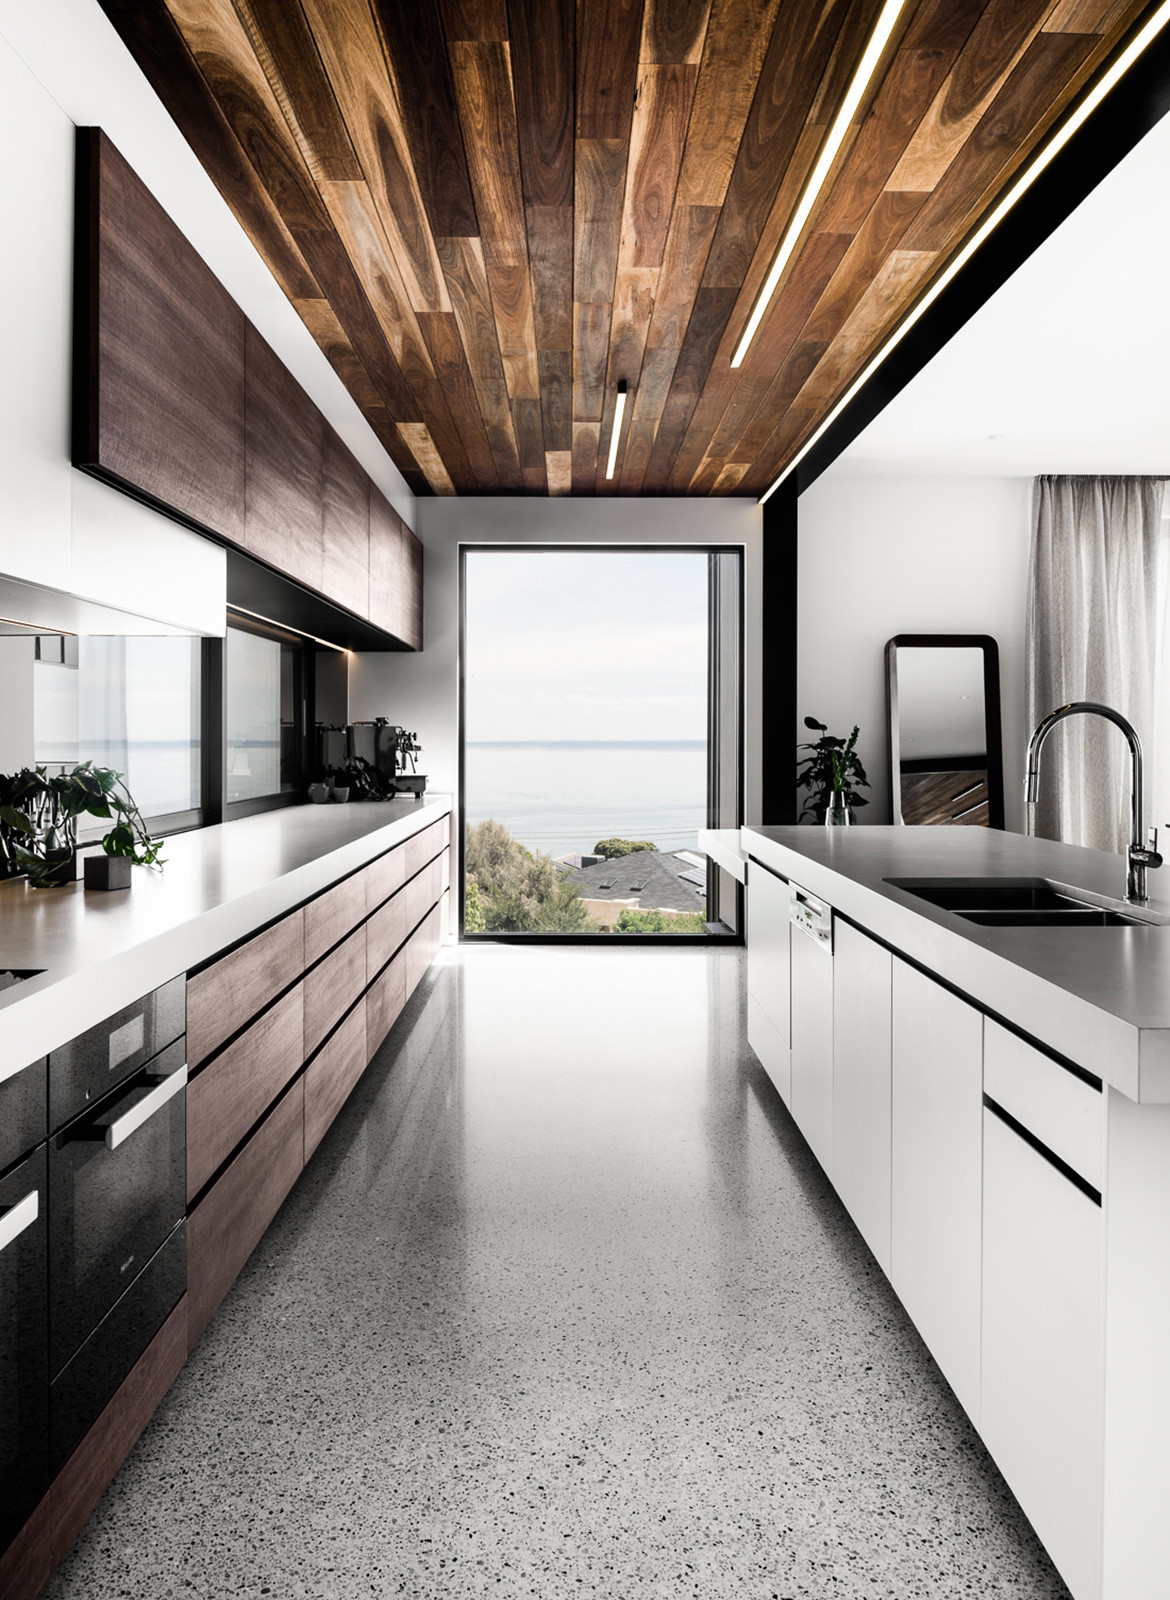 Two Angle House Megowan Architectural CC Tom Blachford kitchen material palette